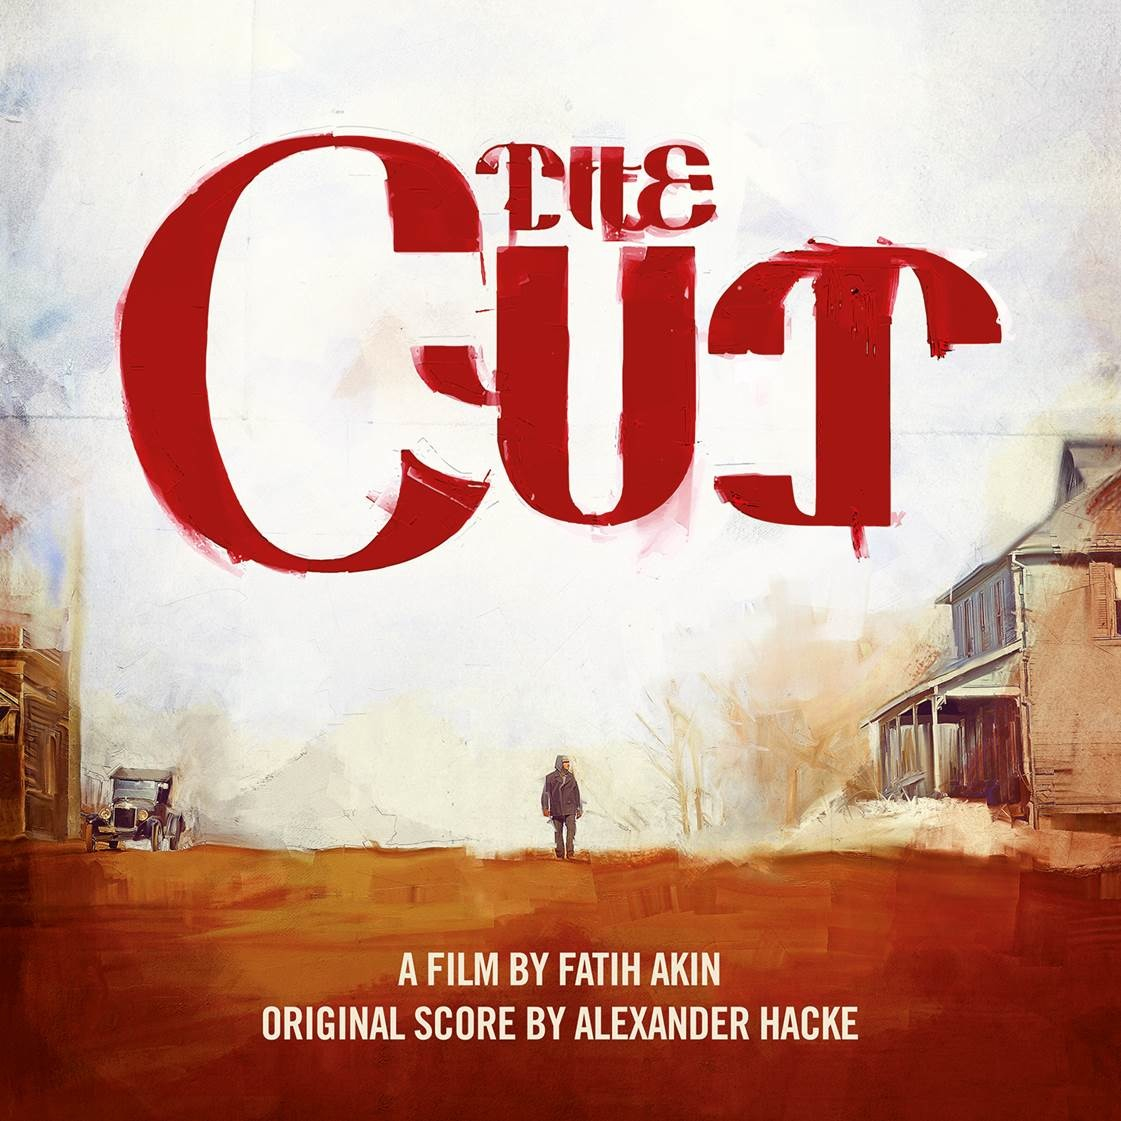 OST - The Cut (Music by Alexander Hacke)